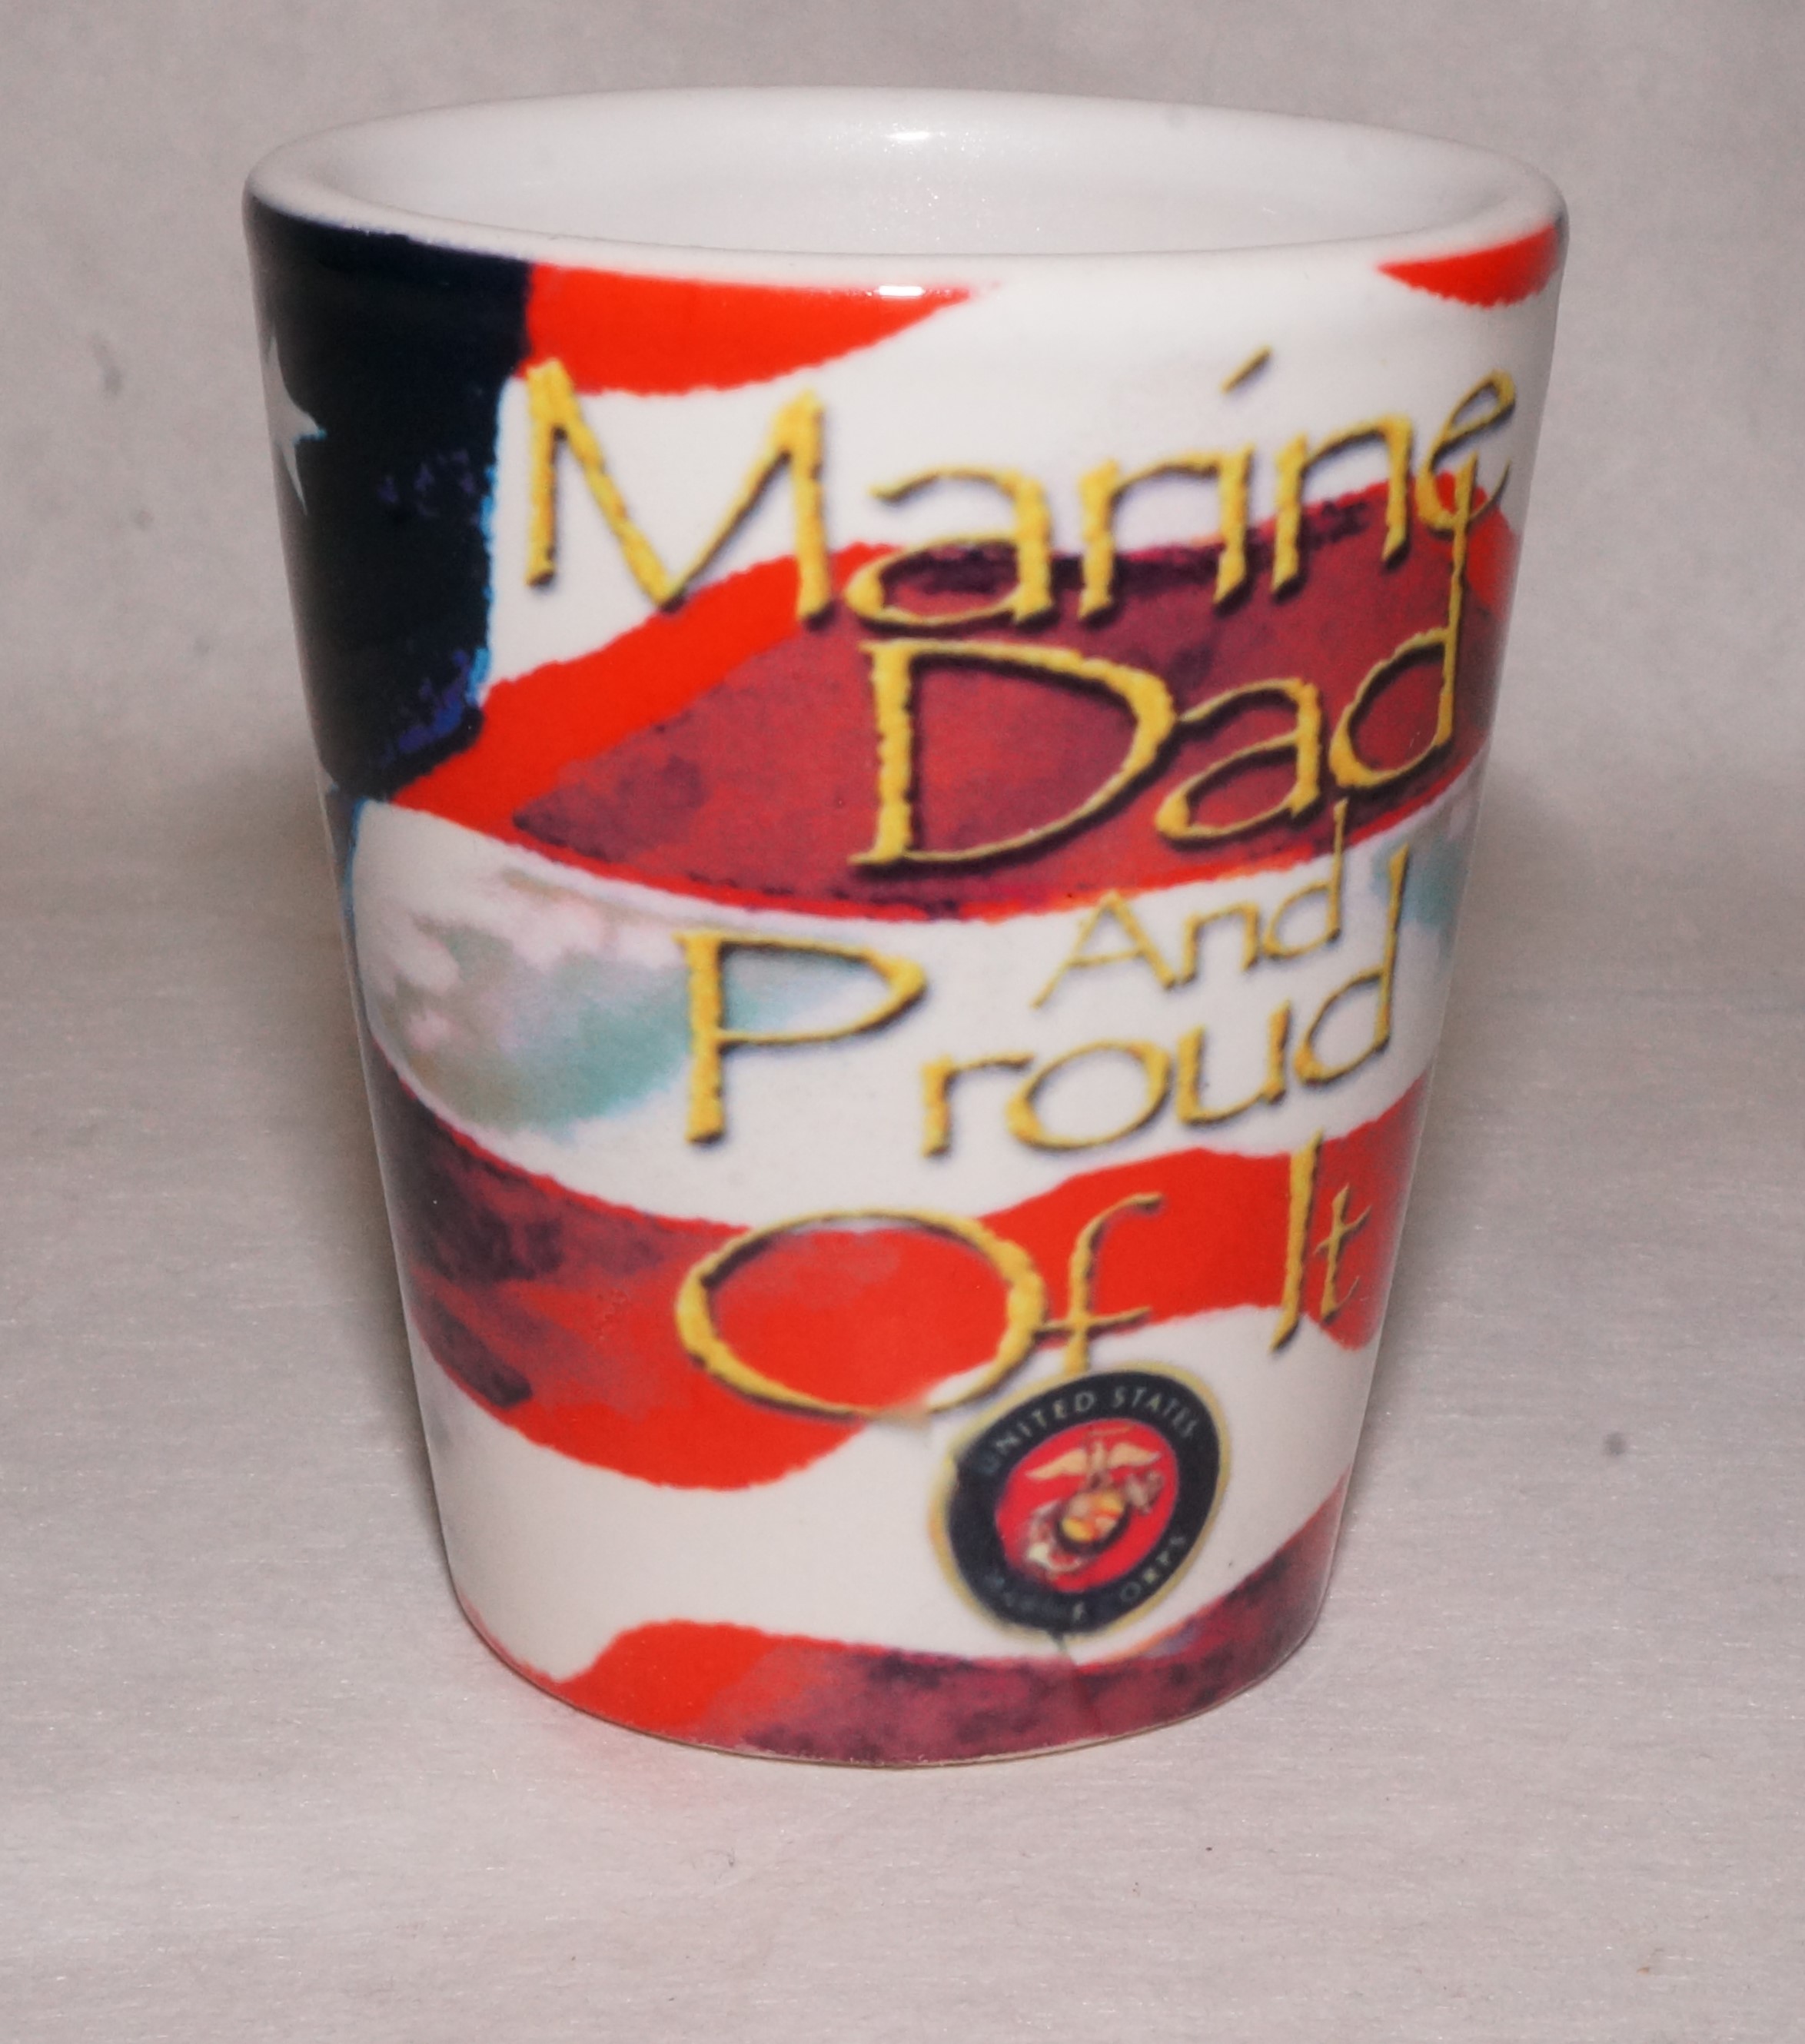 SHOT GLASS-Marine Dad and Proud of It 2oz